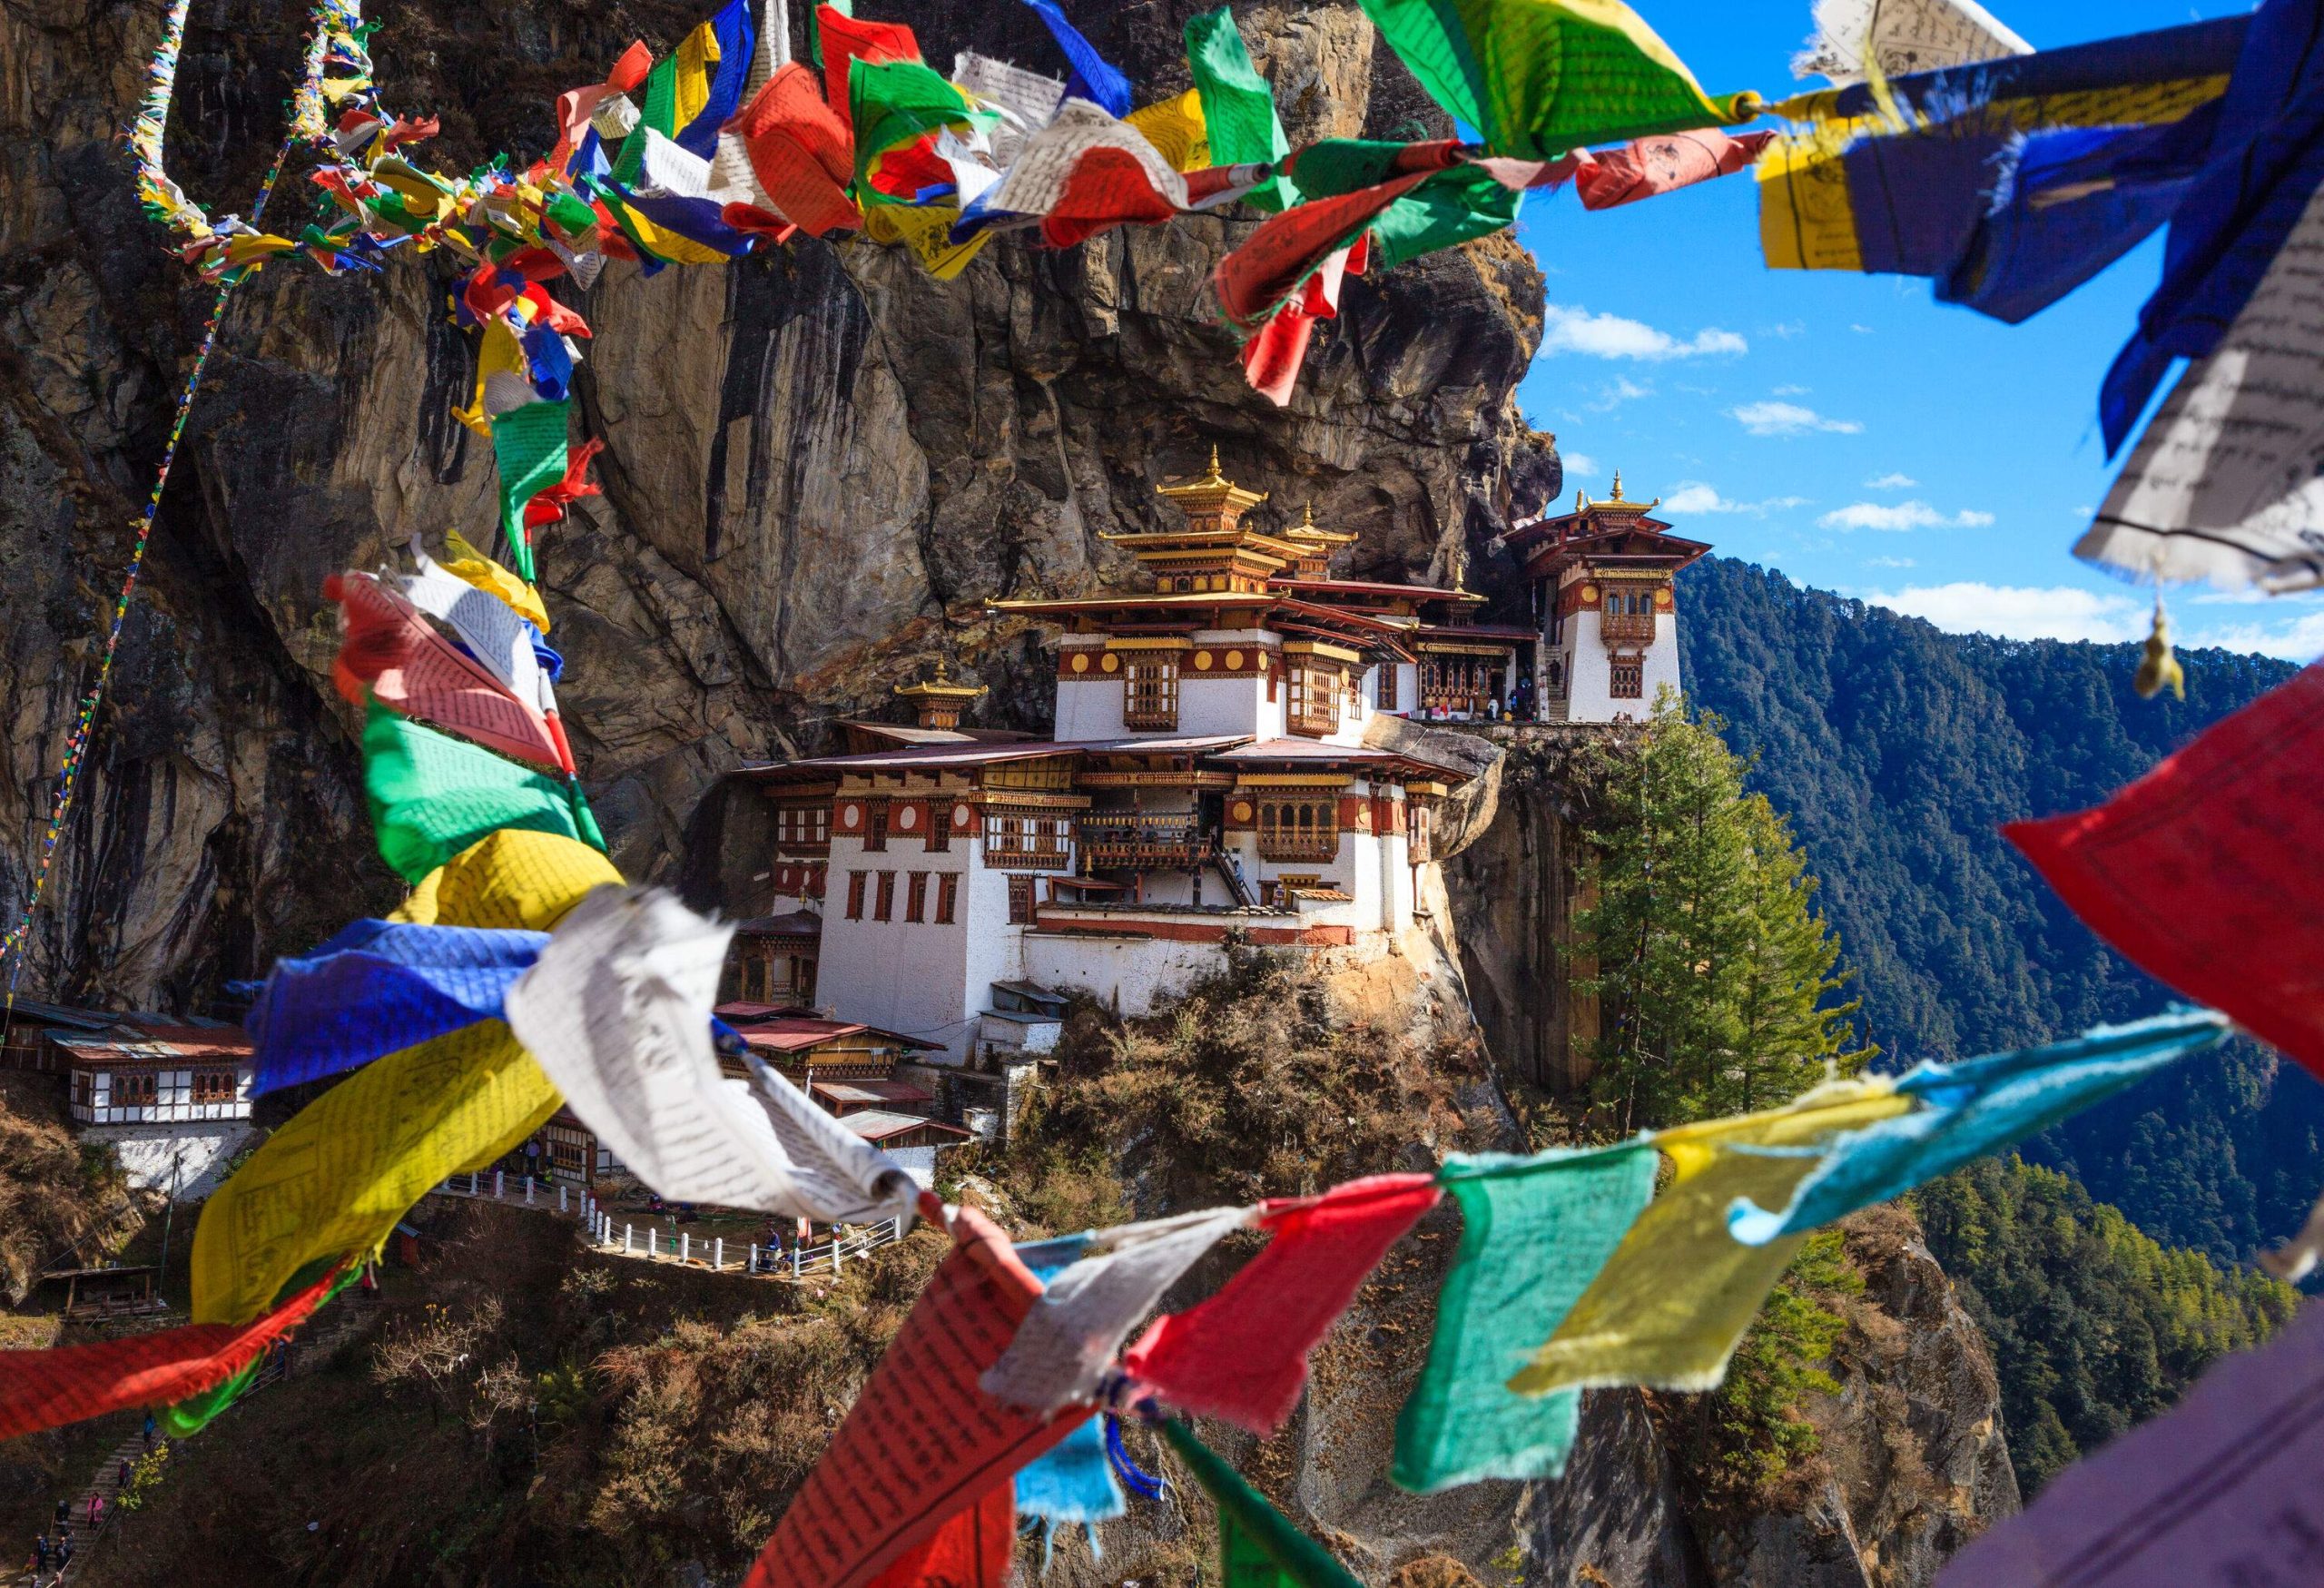 Paro Taktsang is a cliffside Buddhist monastery with colourful hanged banners in the foreground.